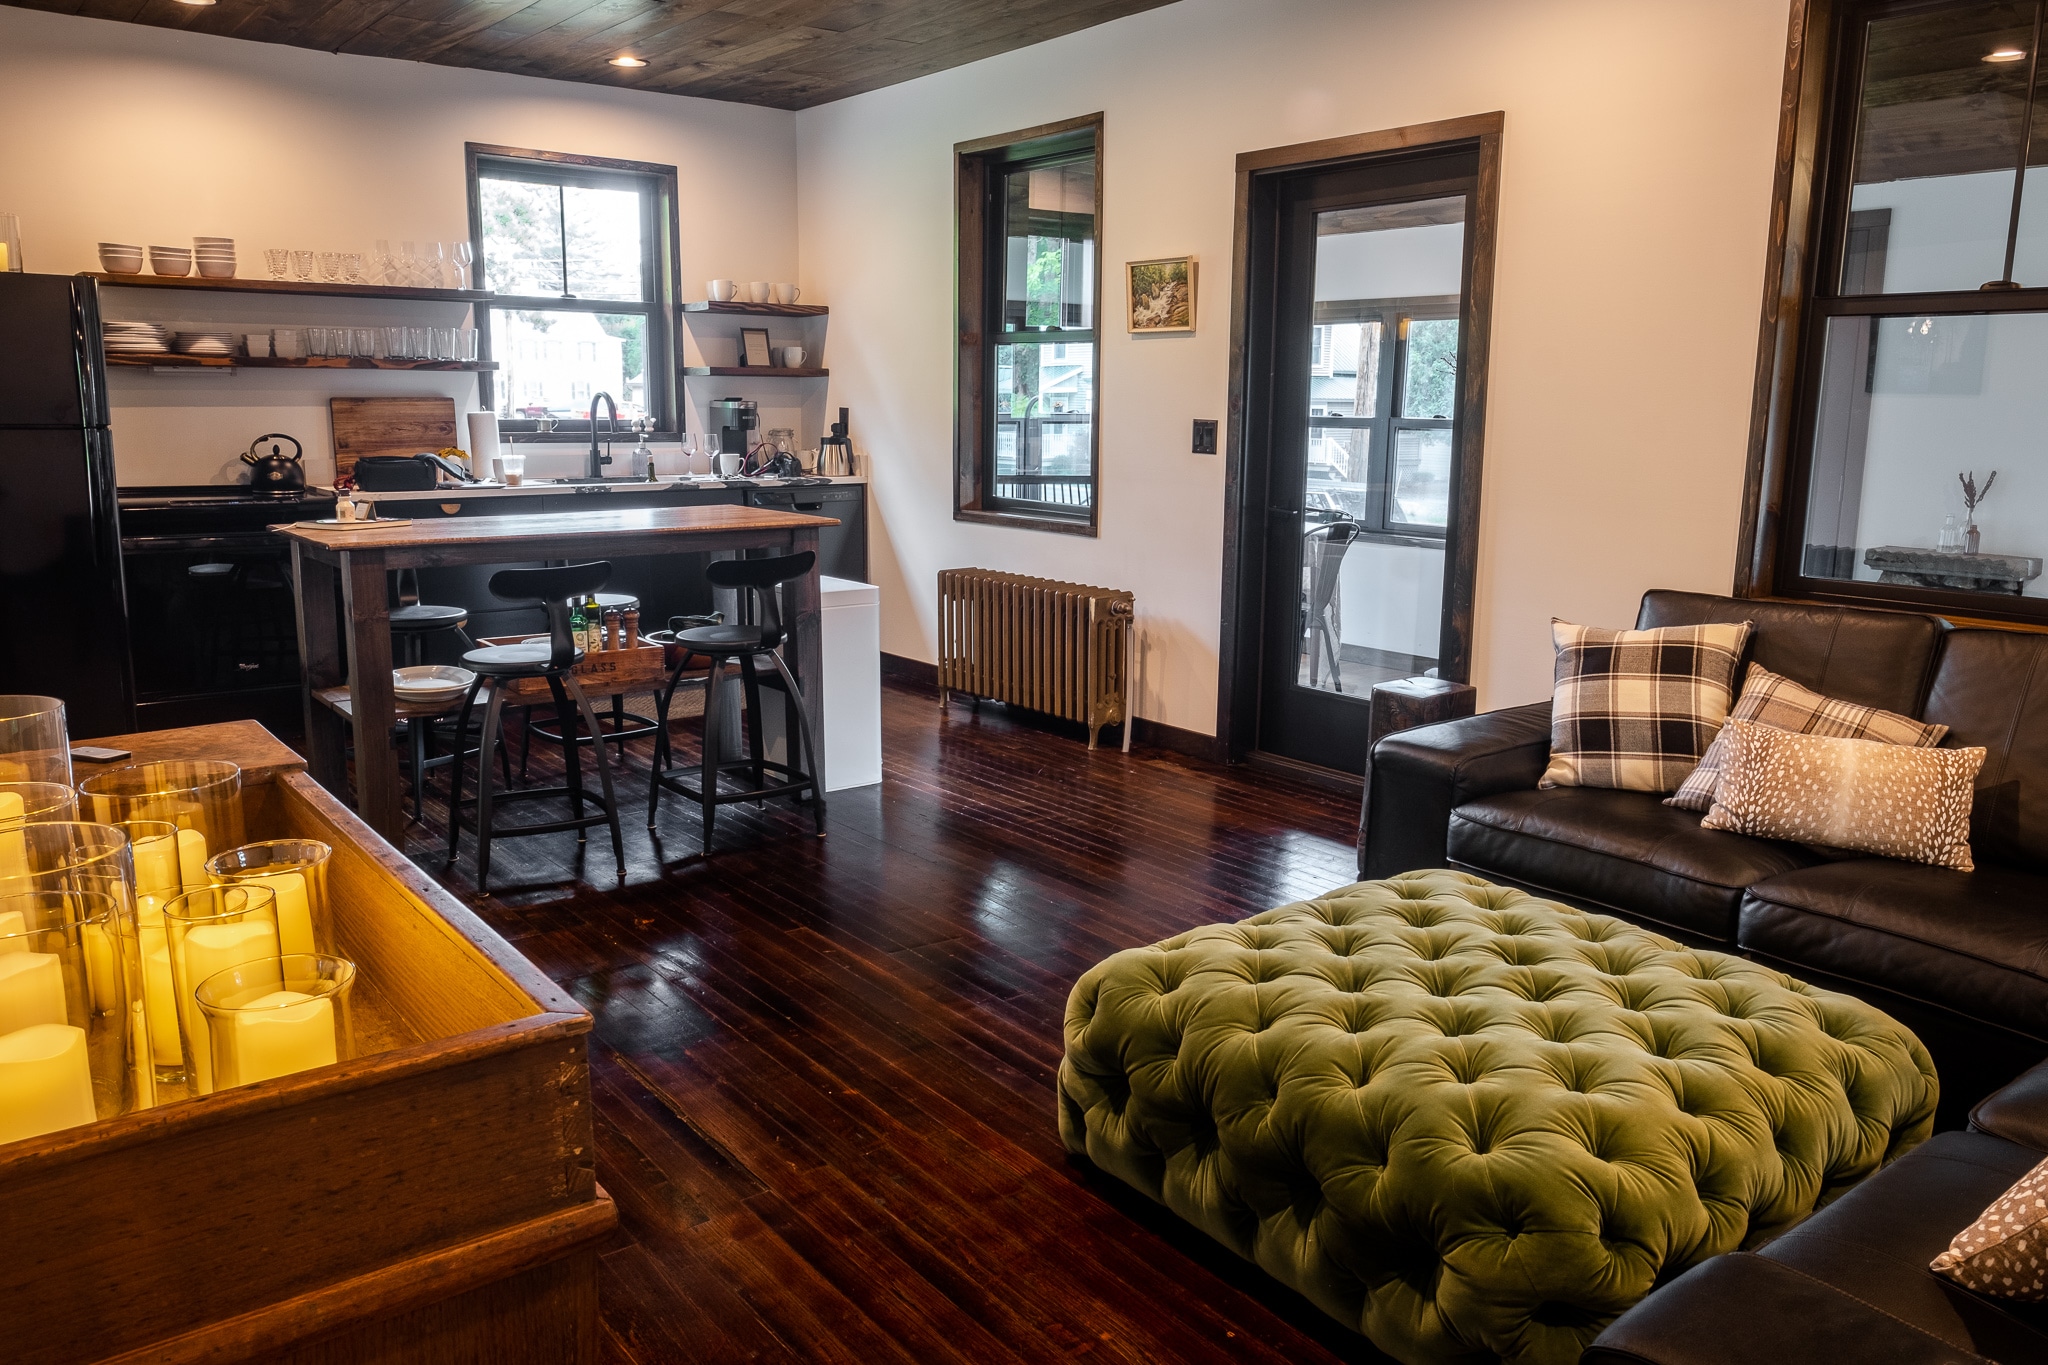 Modern interior of the guesthouse in Speculator NY, Adirondacks